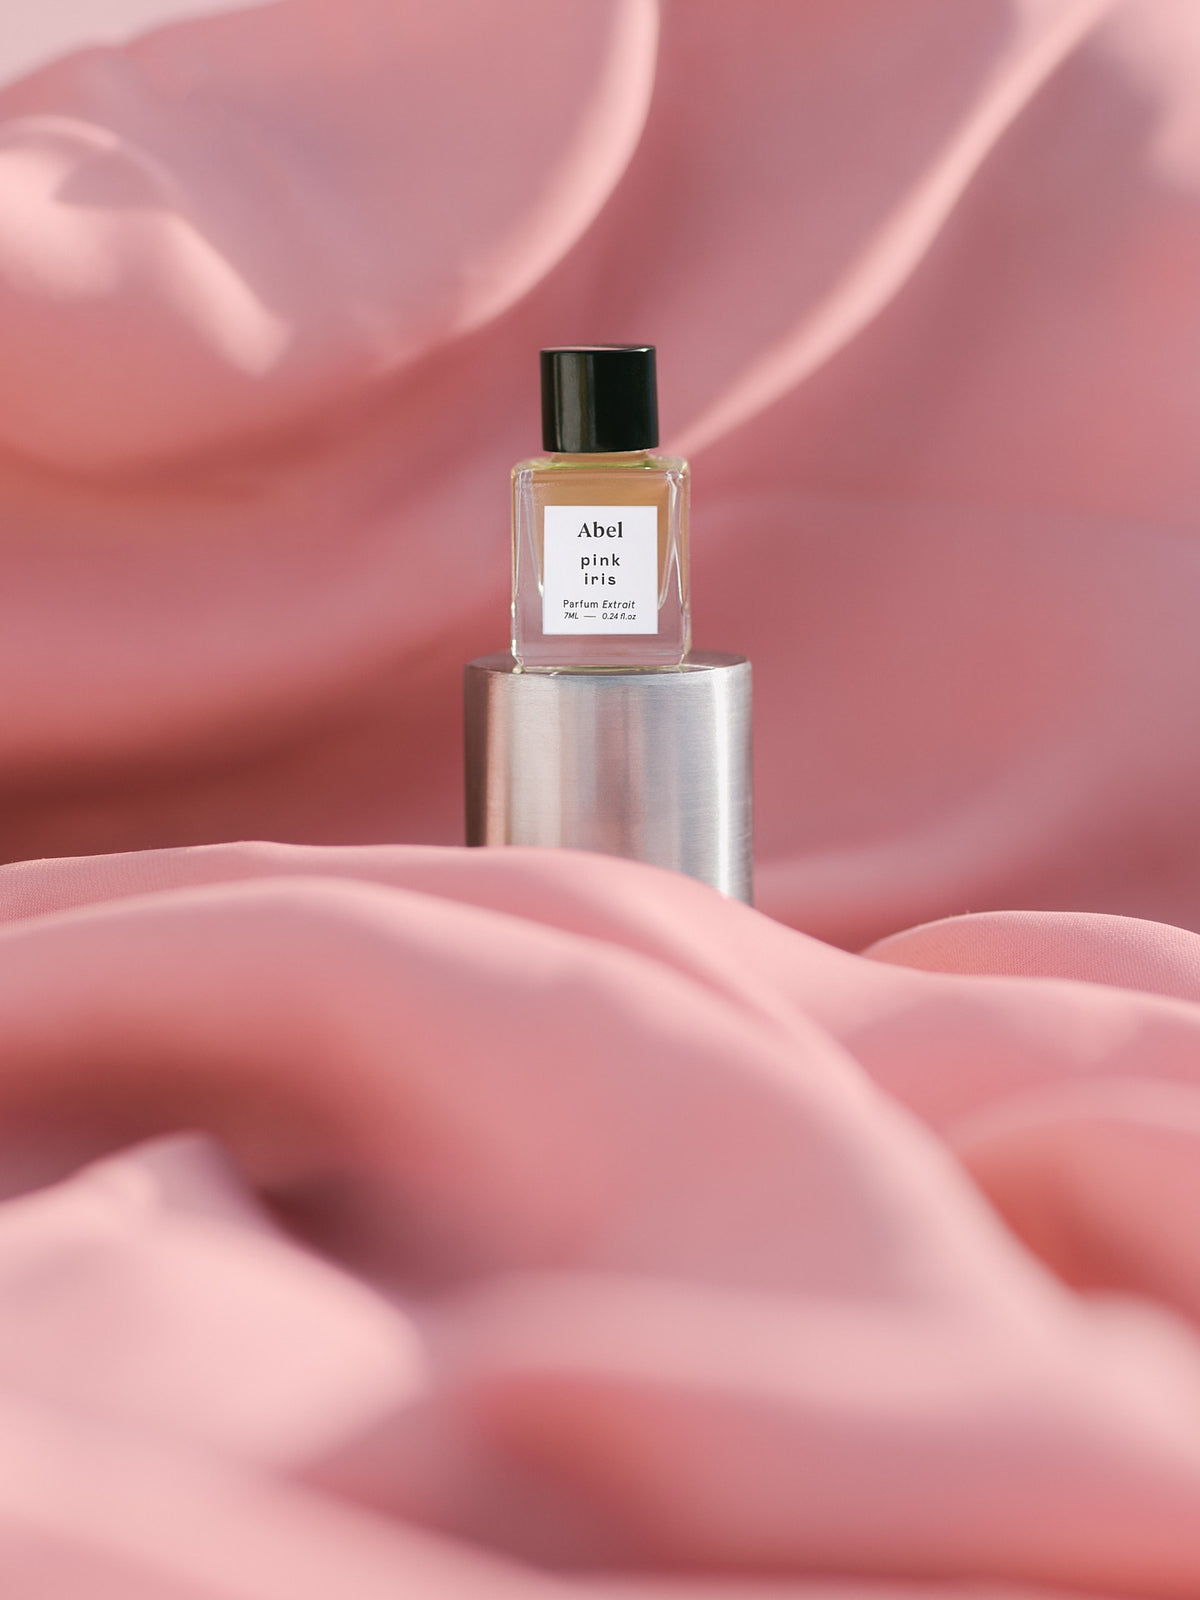 A highly concentrated bottle of the Abel Pink Iris Parfum Extrait – for calm sitting on top of a pink fabric.